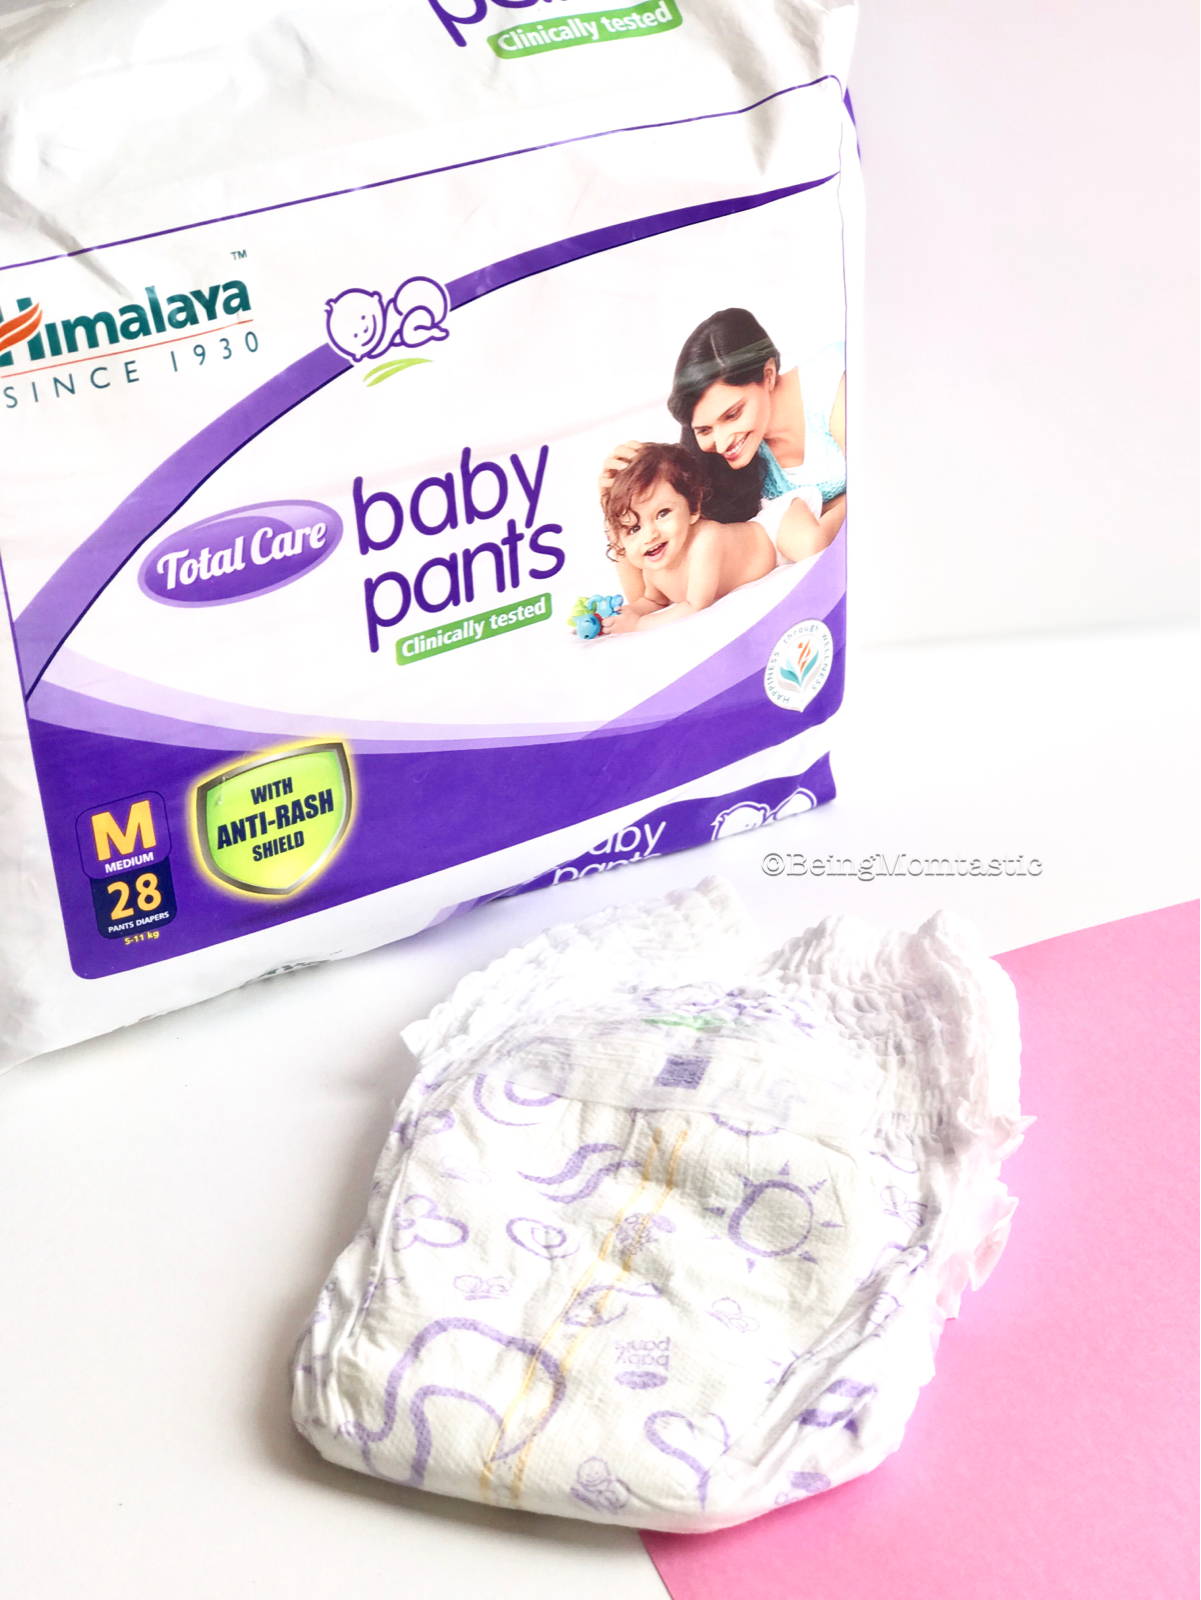 Buy Himalaya Total care Baby Pants Diapers Medium (9 count ) Online at Low  Prices in India - Amazon.in